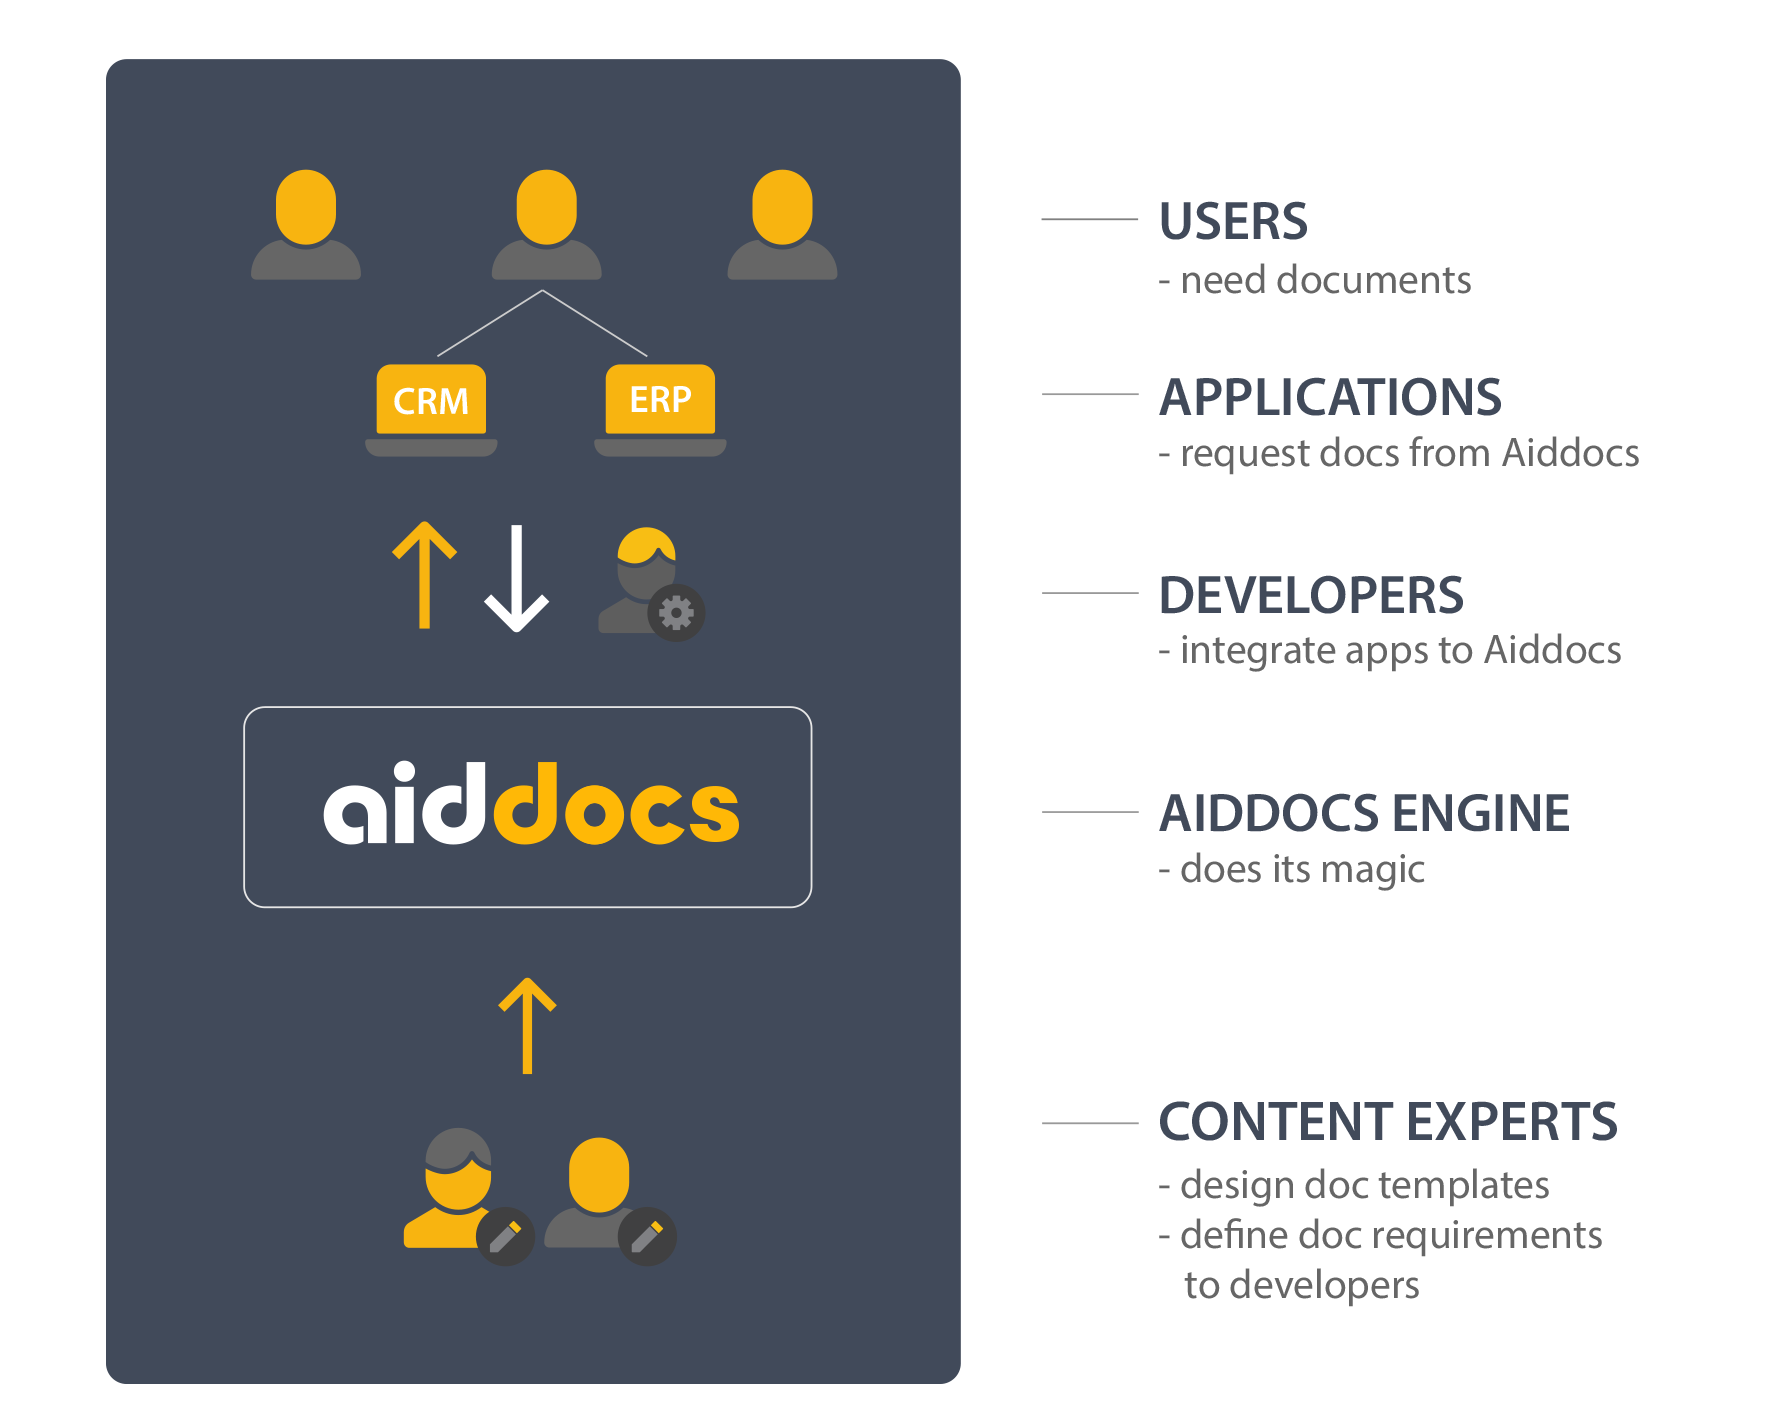 Aiddocs separates the roles of software developers and content experts.